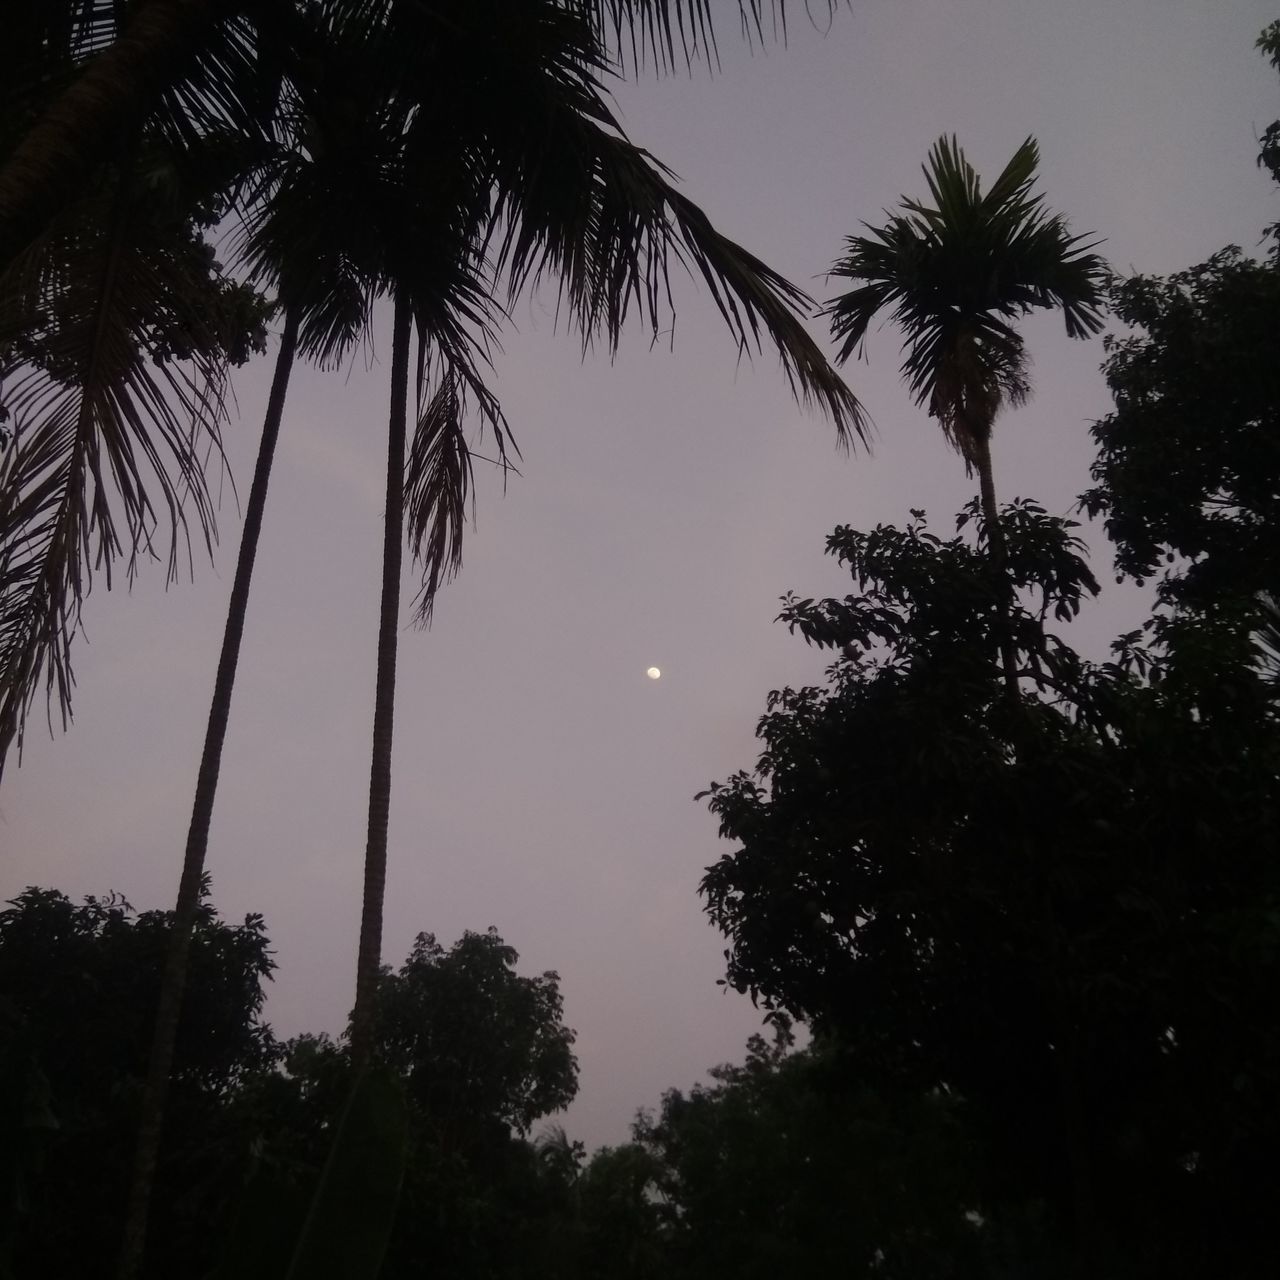 tree, plant, sky, palm tree, tropical climate, silhouette, nature, beauty in nature, tranquility, growth, no people, scenics - nature, low angle view, night, moon, outdoors, darkness, tranquil scene, dusk, coconut palm tree, tropical tree, idyllic, land, branch, leaf, morning, tree trunk